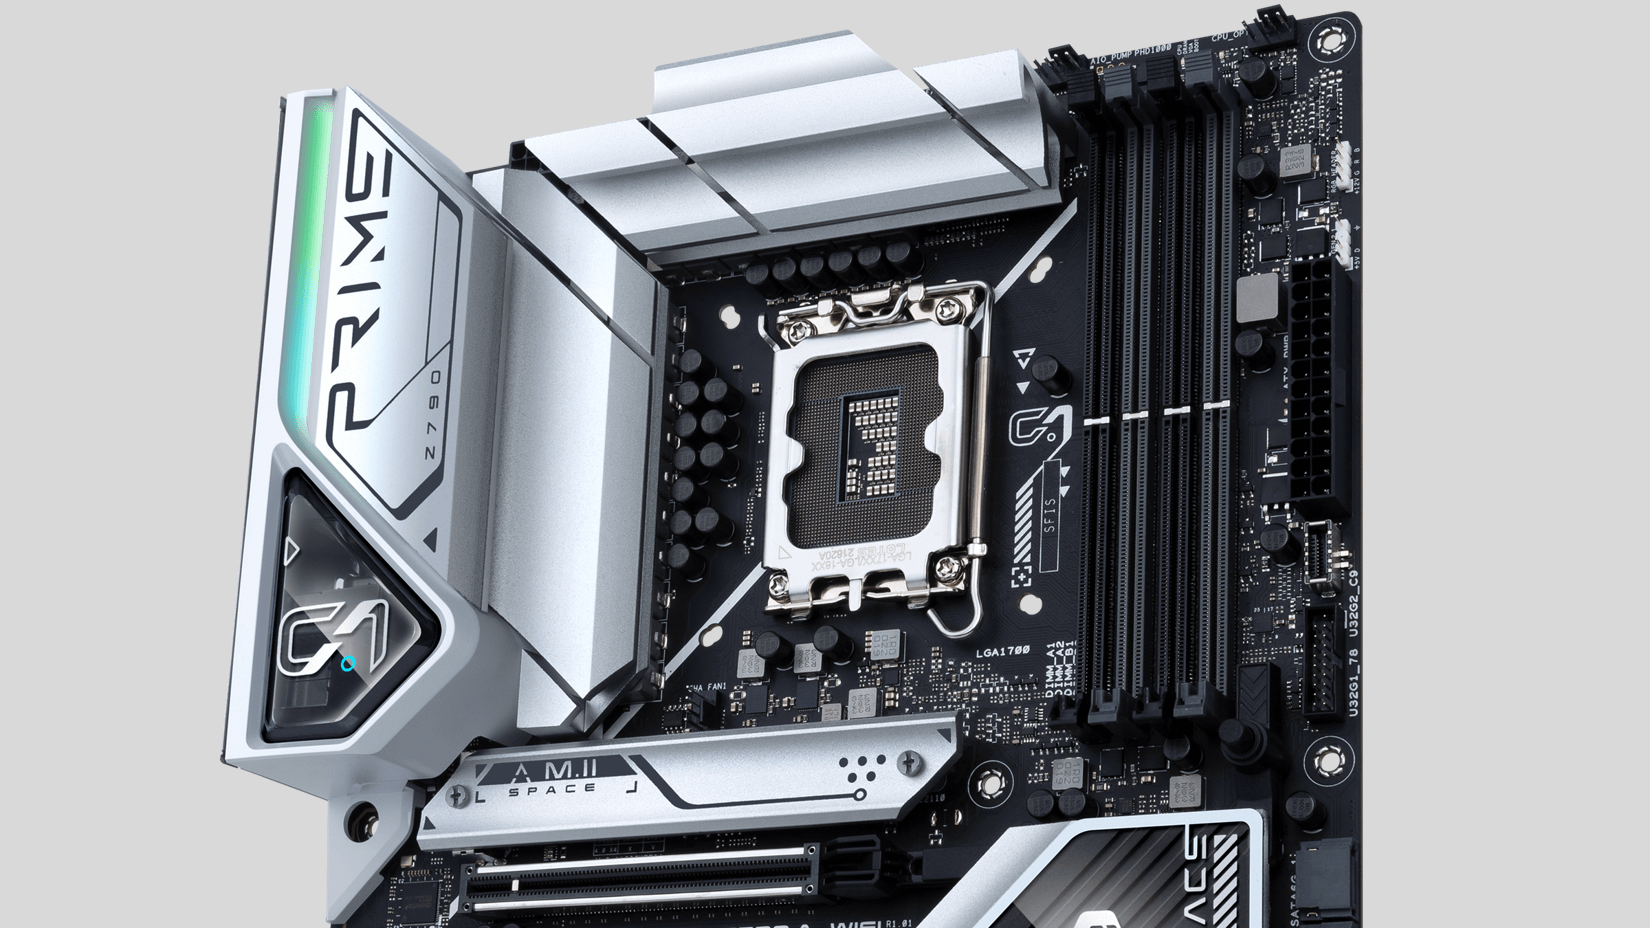 ASUS Z790/H770/B760 – The best motherboards for 14th Gen Raptor Lake-S  refresh and 13th Gen Intel Raptor Lake-S and 12th Gen Intel Alder Lake CPUs